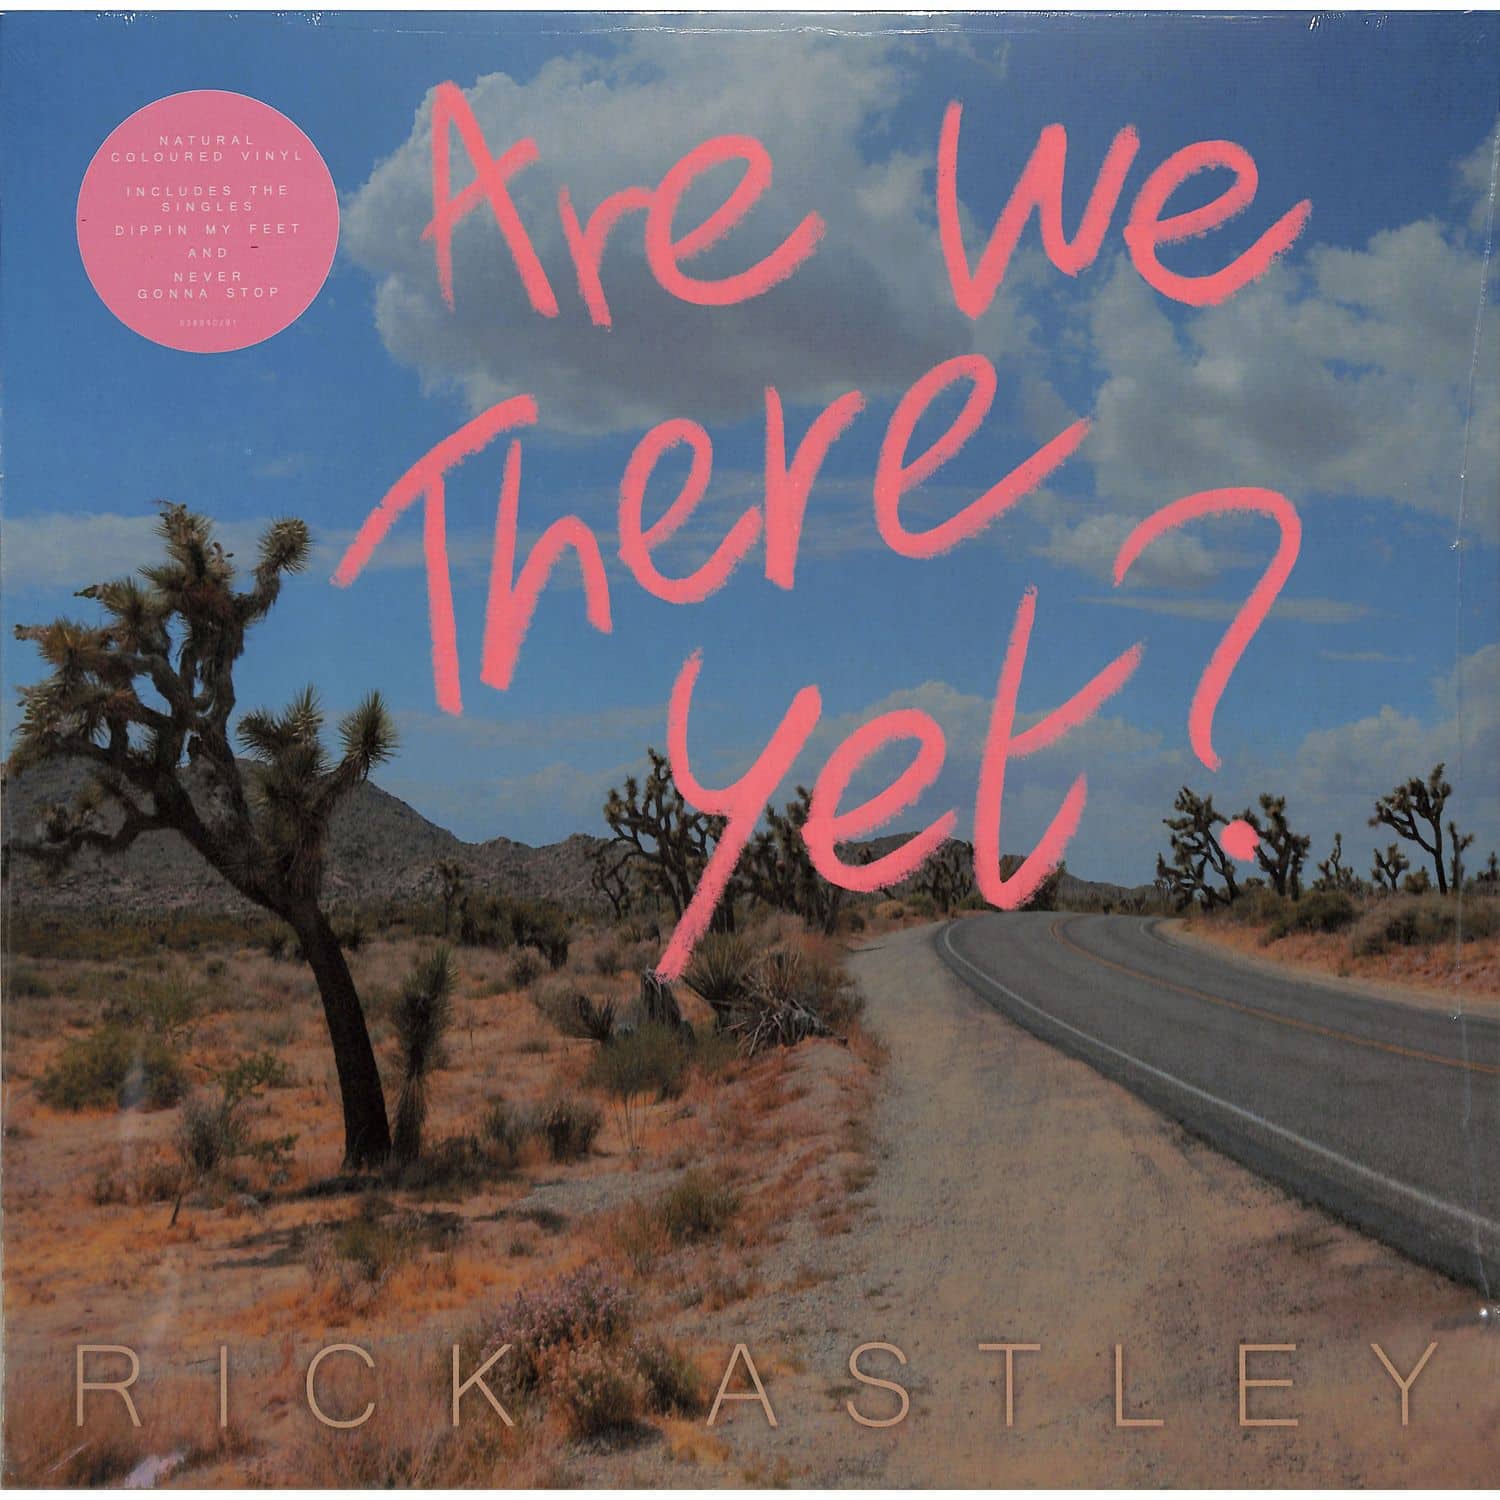 Rick Astley - ARE WE THERE YET? 